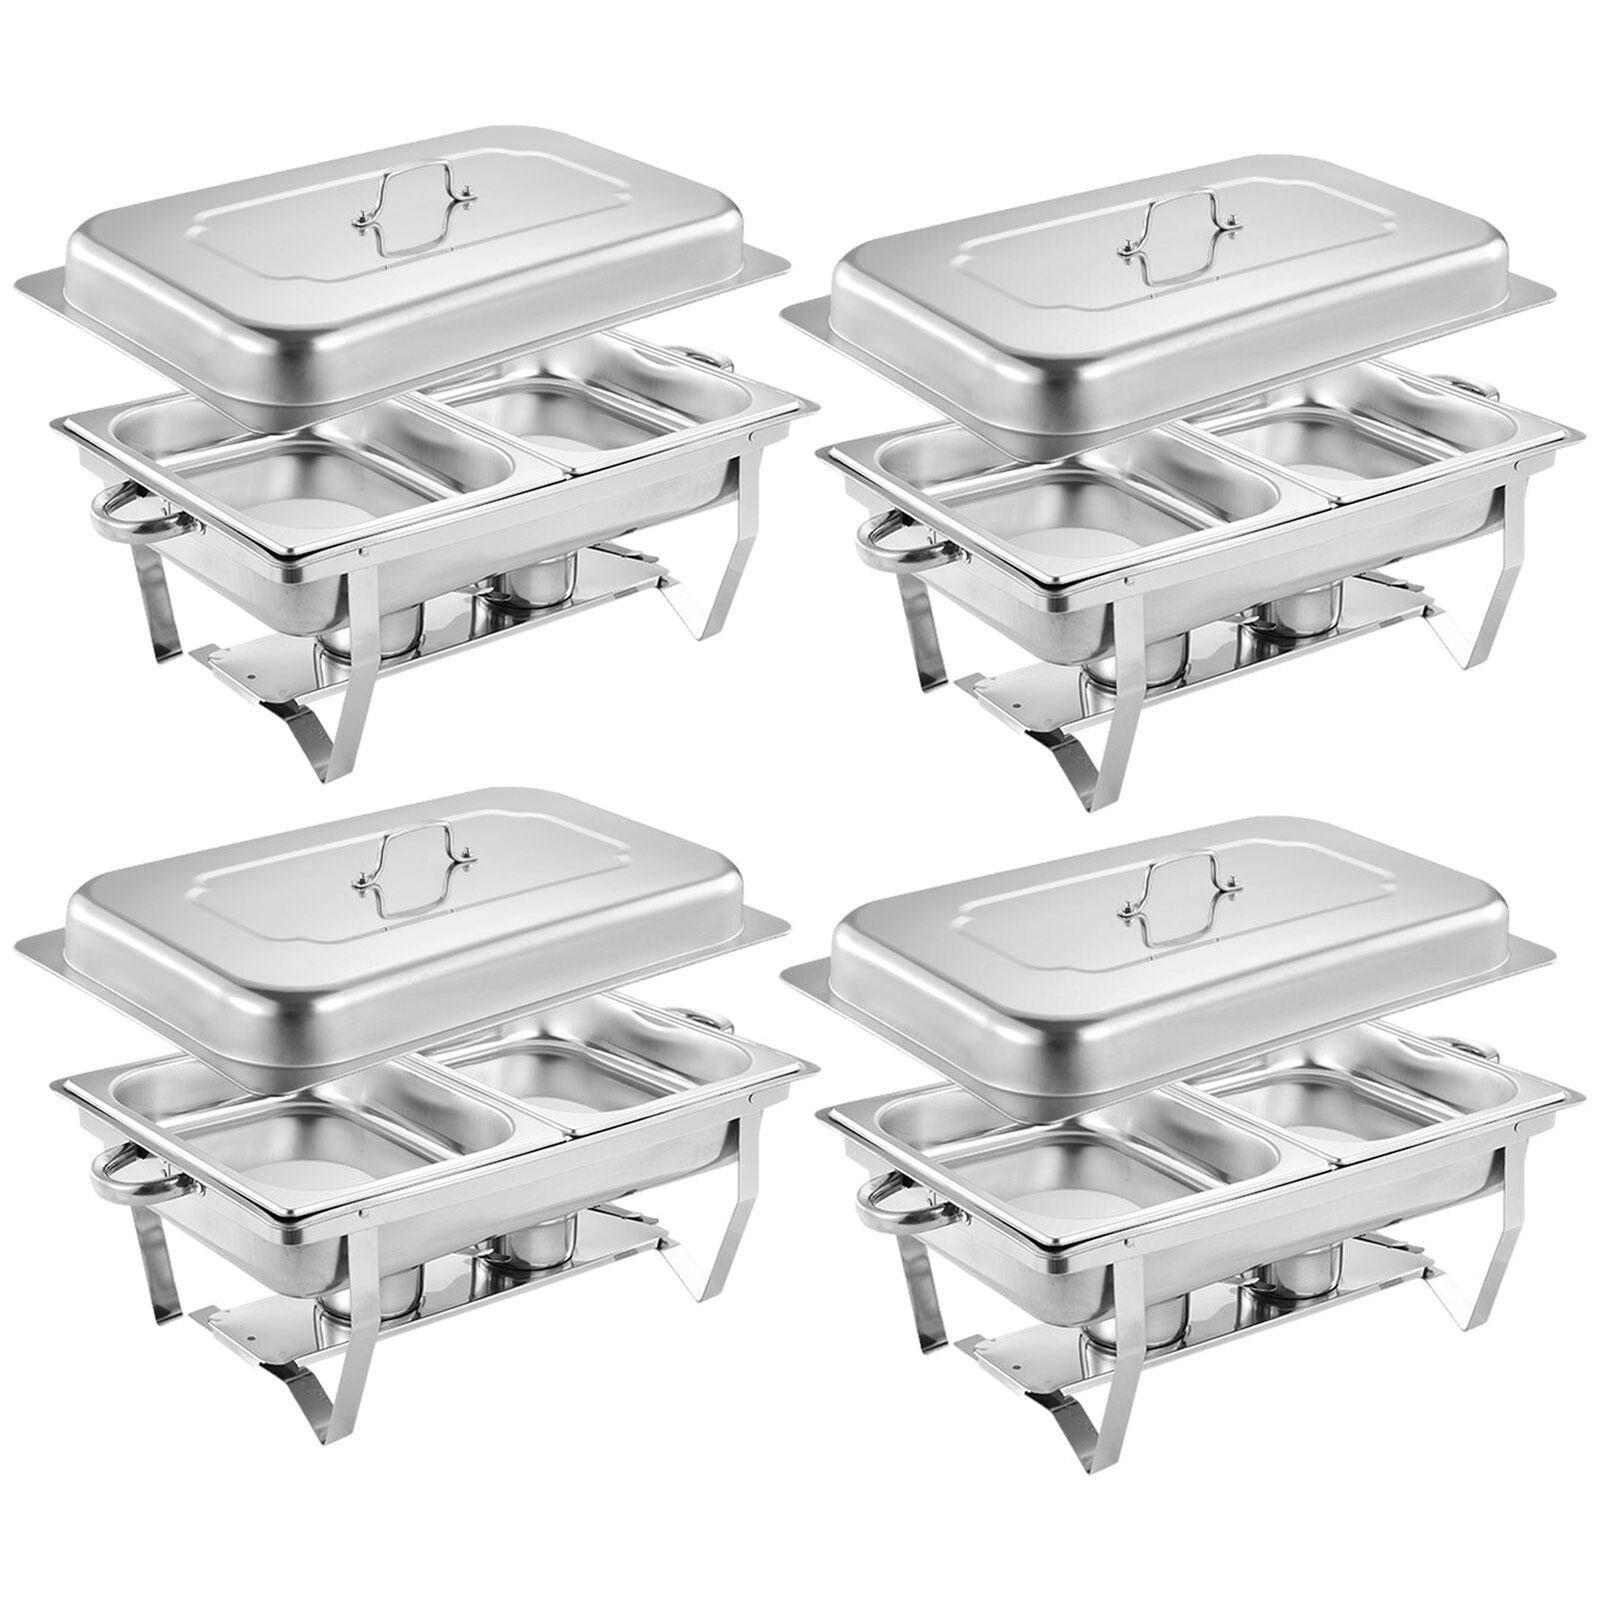 4PCS Food Trays Chafing Dish Set 8 QT Food Warmer Stainless Steel Buffet Server